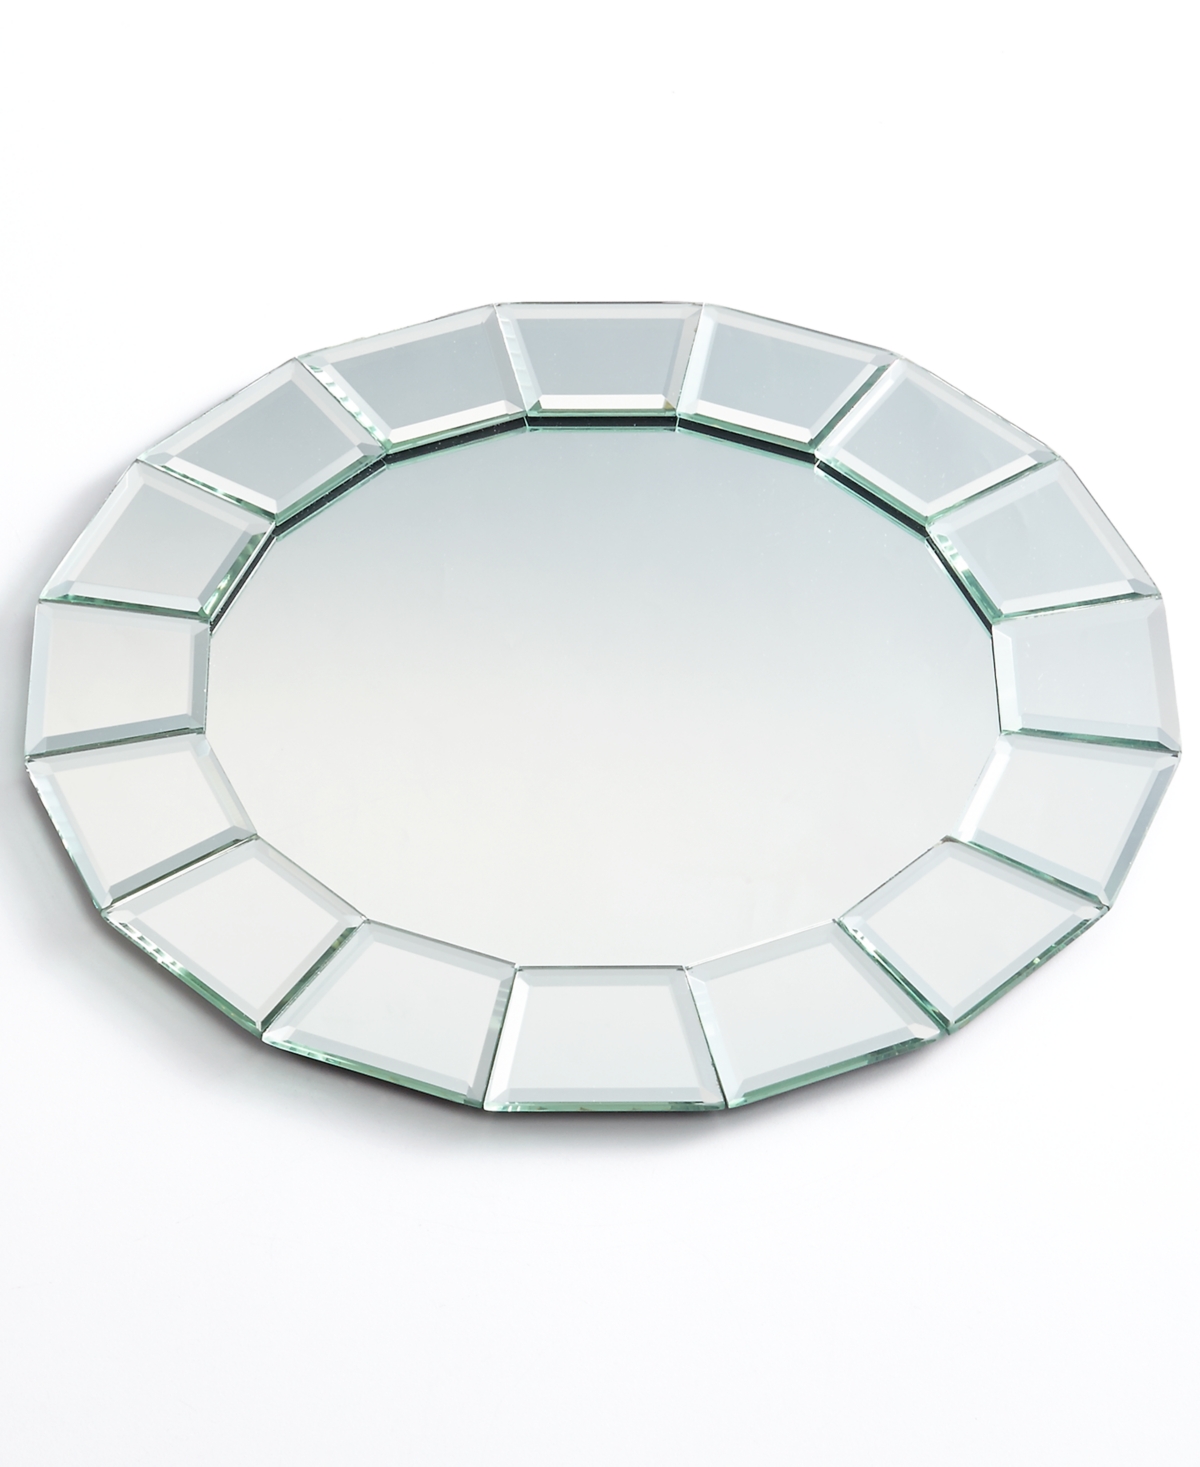 AMERICAN ATELIER JAY IMPORT AMERICAN ATELIER MIRROR CHARGER PLATE